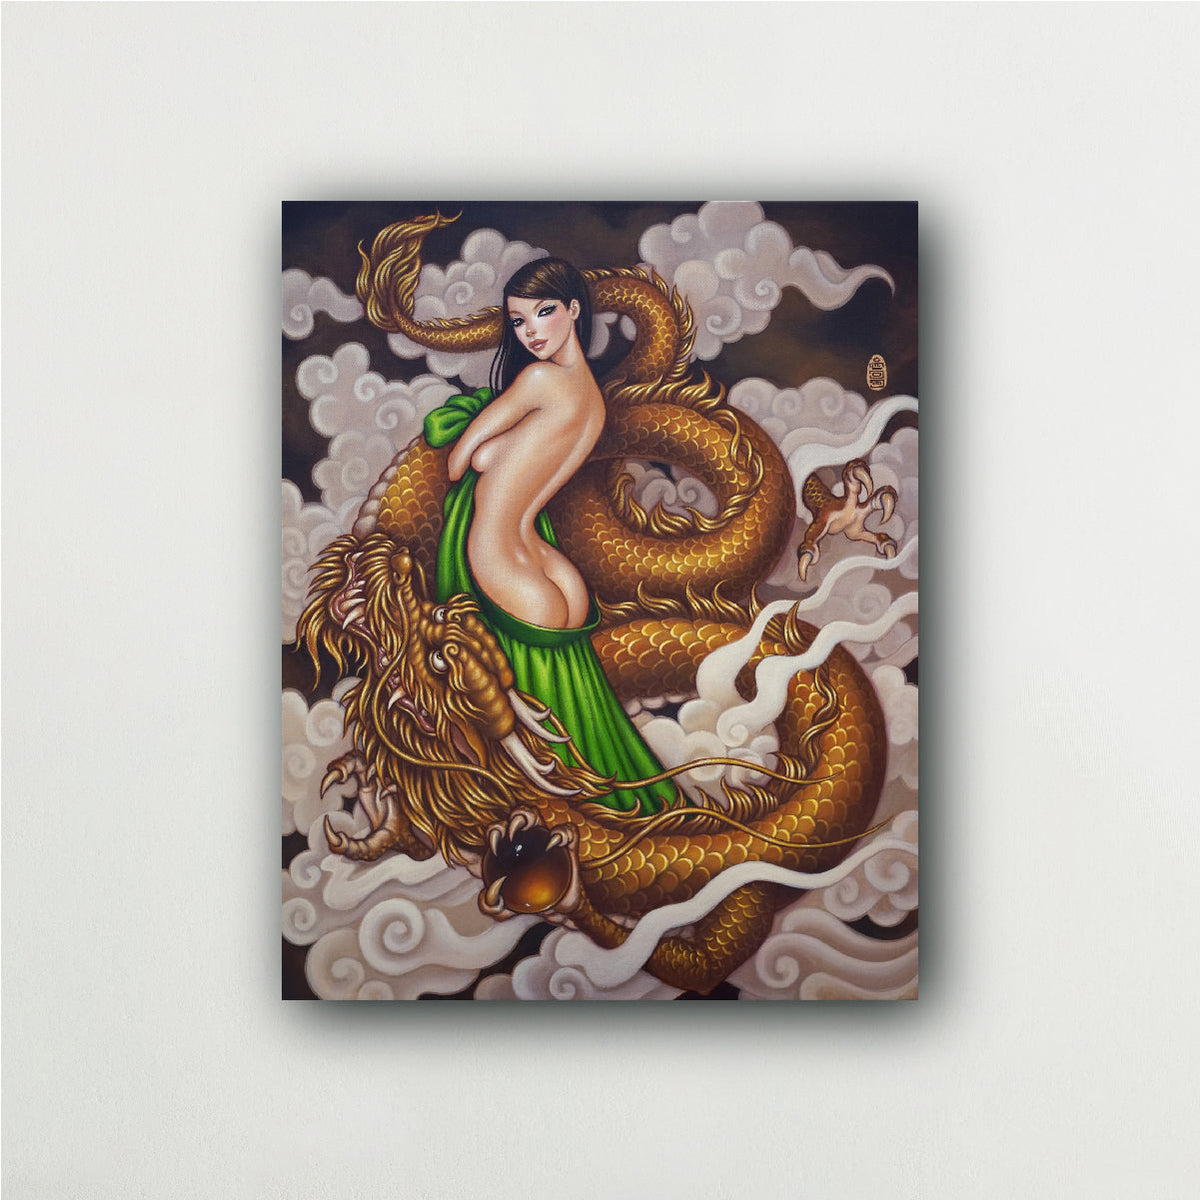 painting by artist mimi yoon of a woman and a dragon surrounded by clouds. She is wearing a bottle green skirt and has long dark hair.